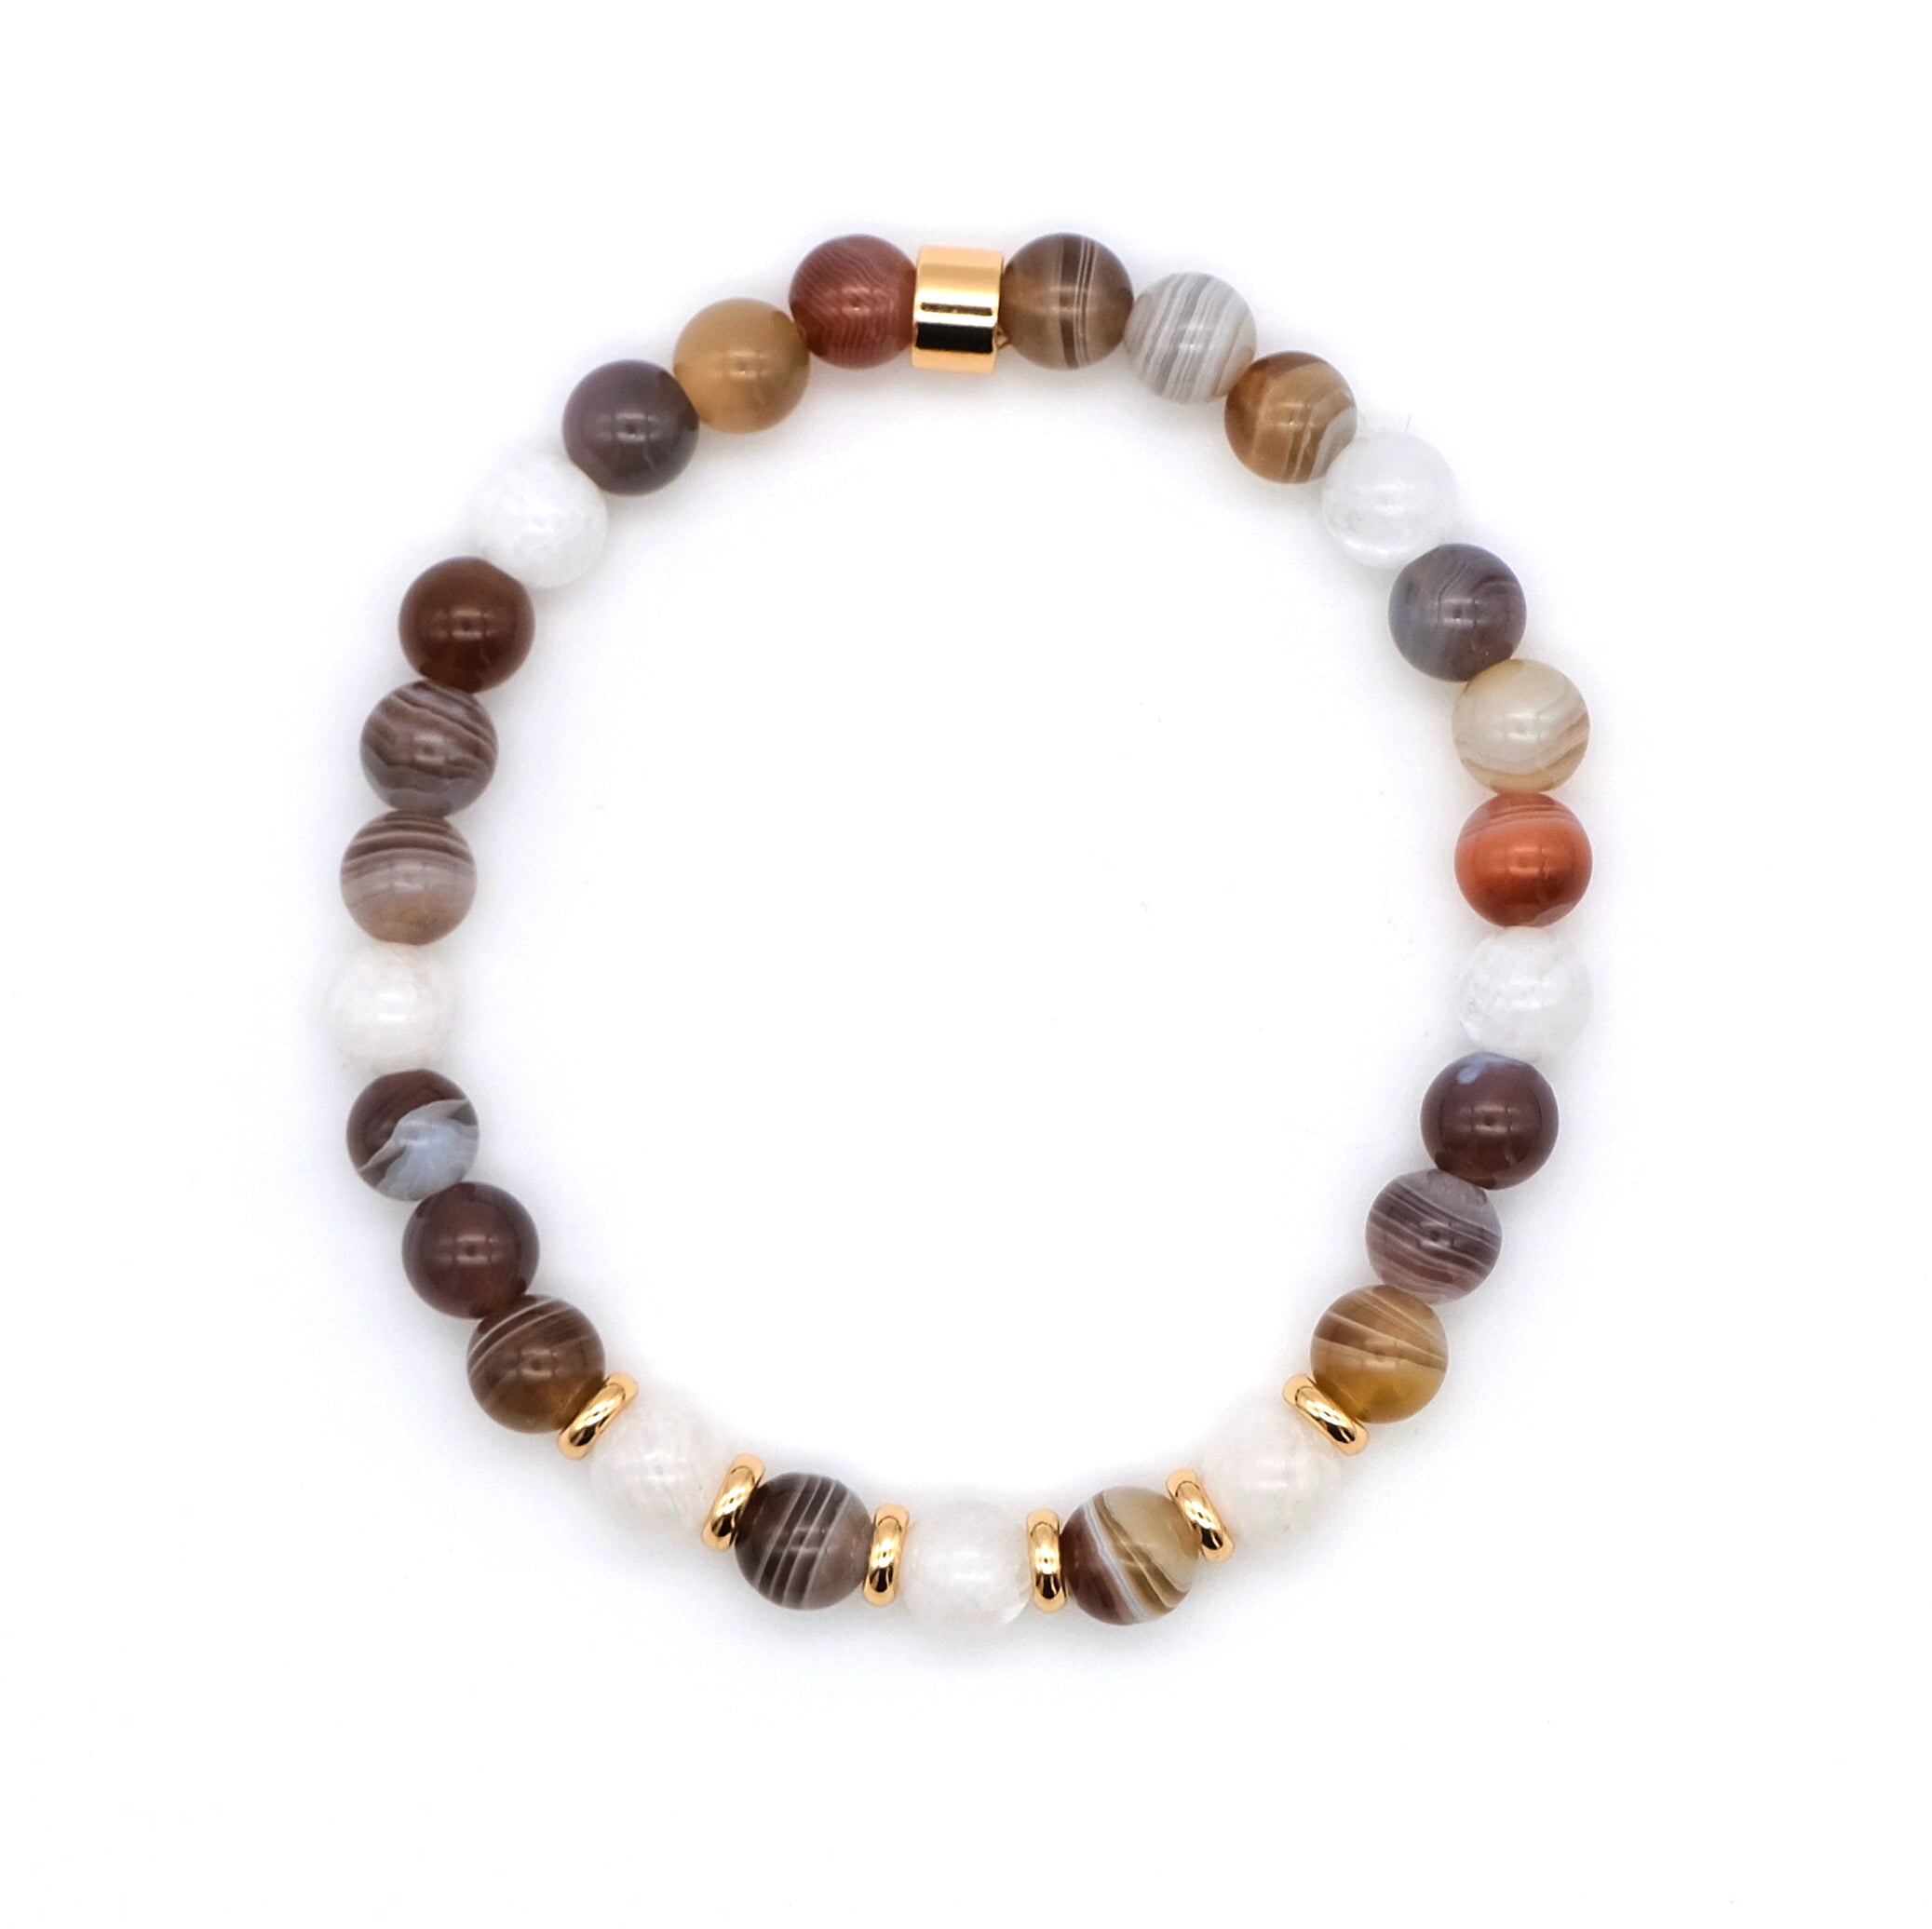 Botswana Agate and Moonstone gemstone bracelet in 6mm beads with gold accessories from above